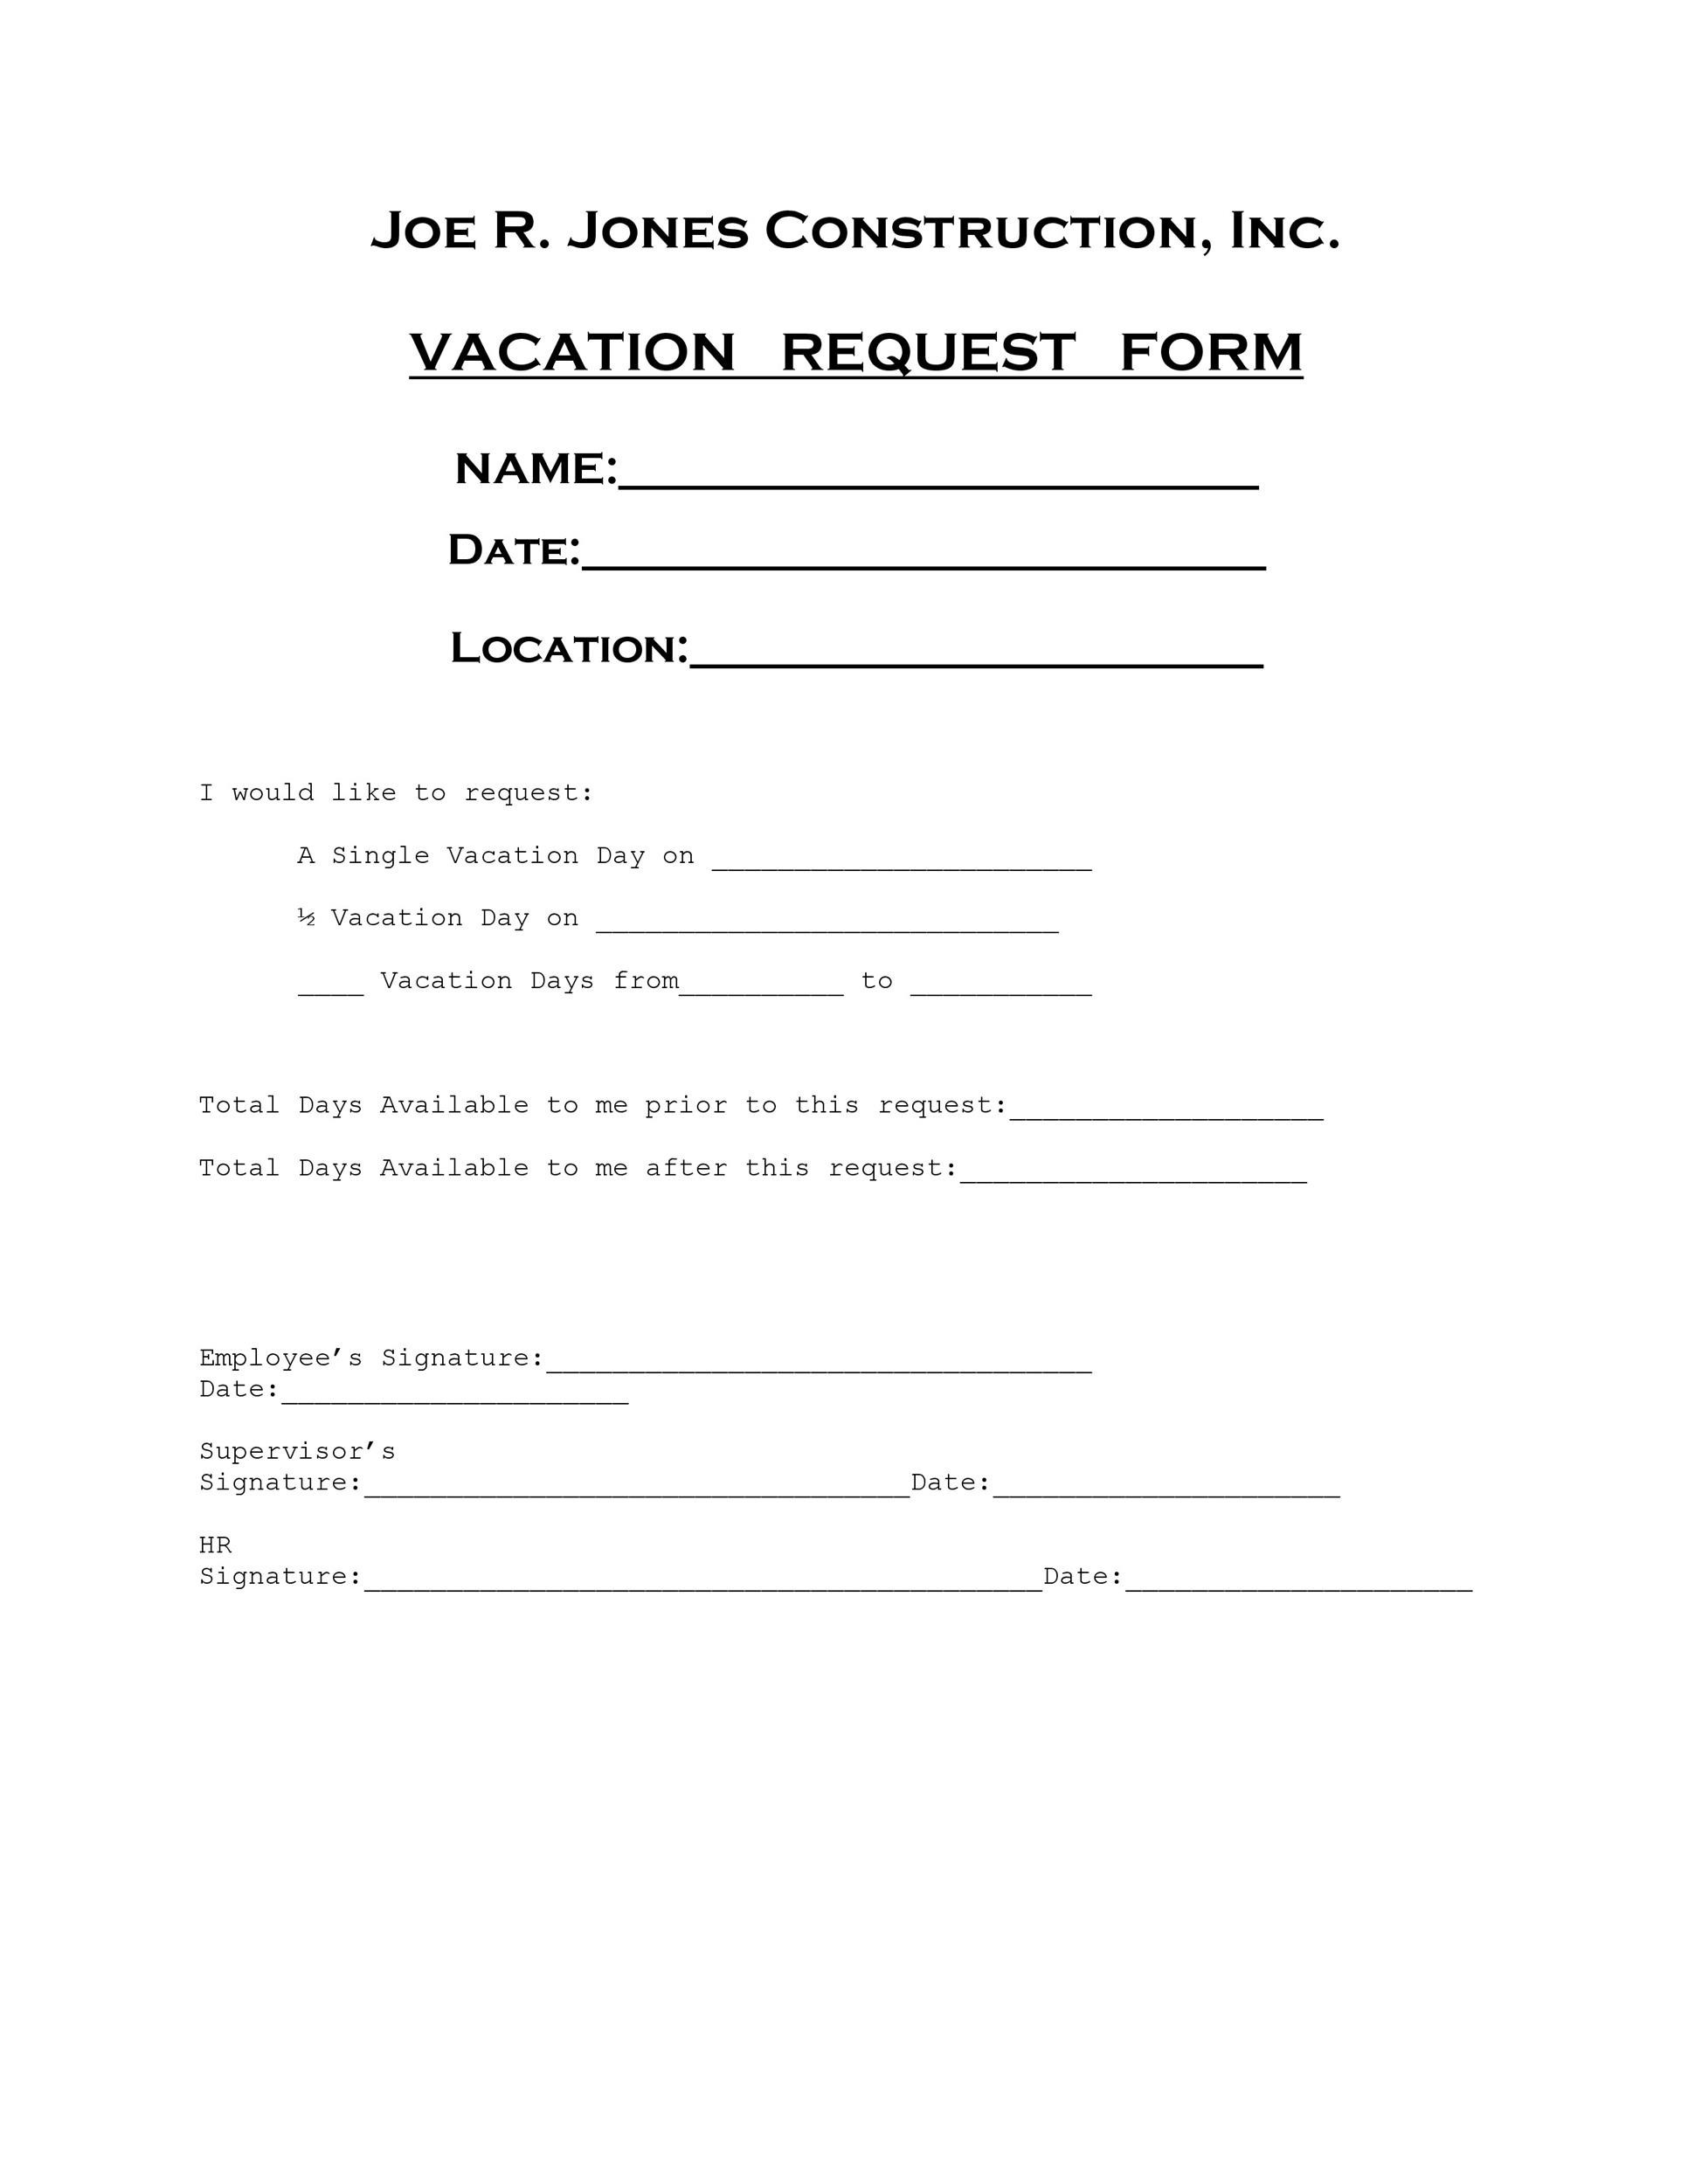 printable-vacation-request-form-2022-printable-world-holiday